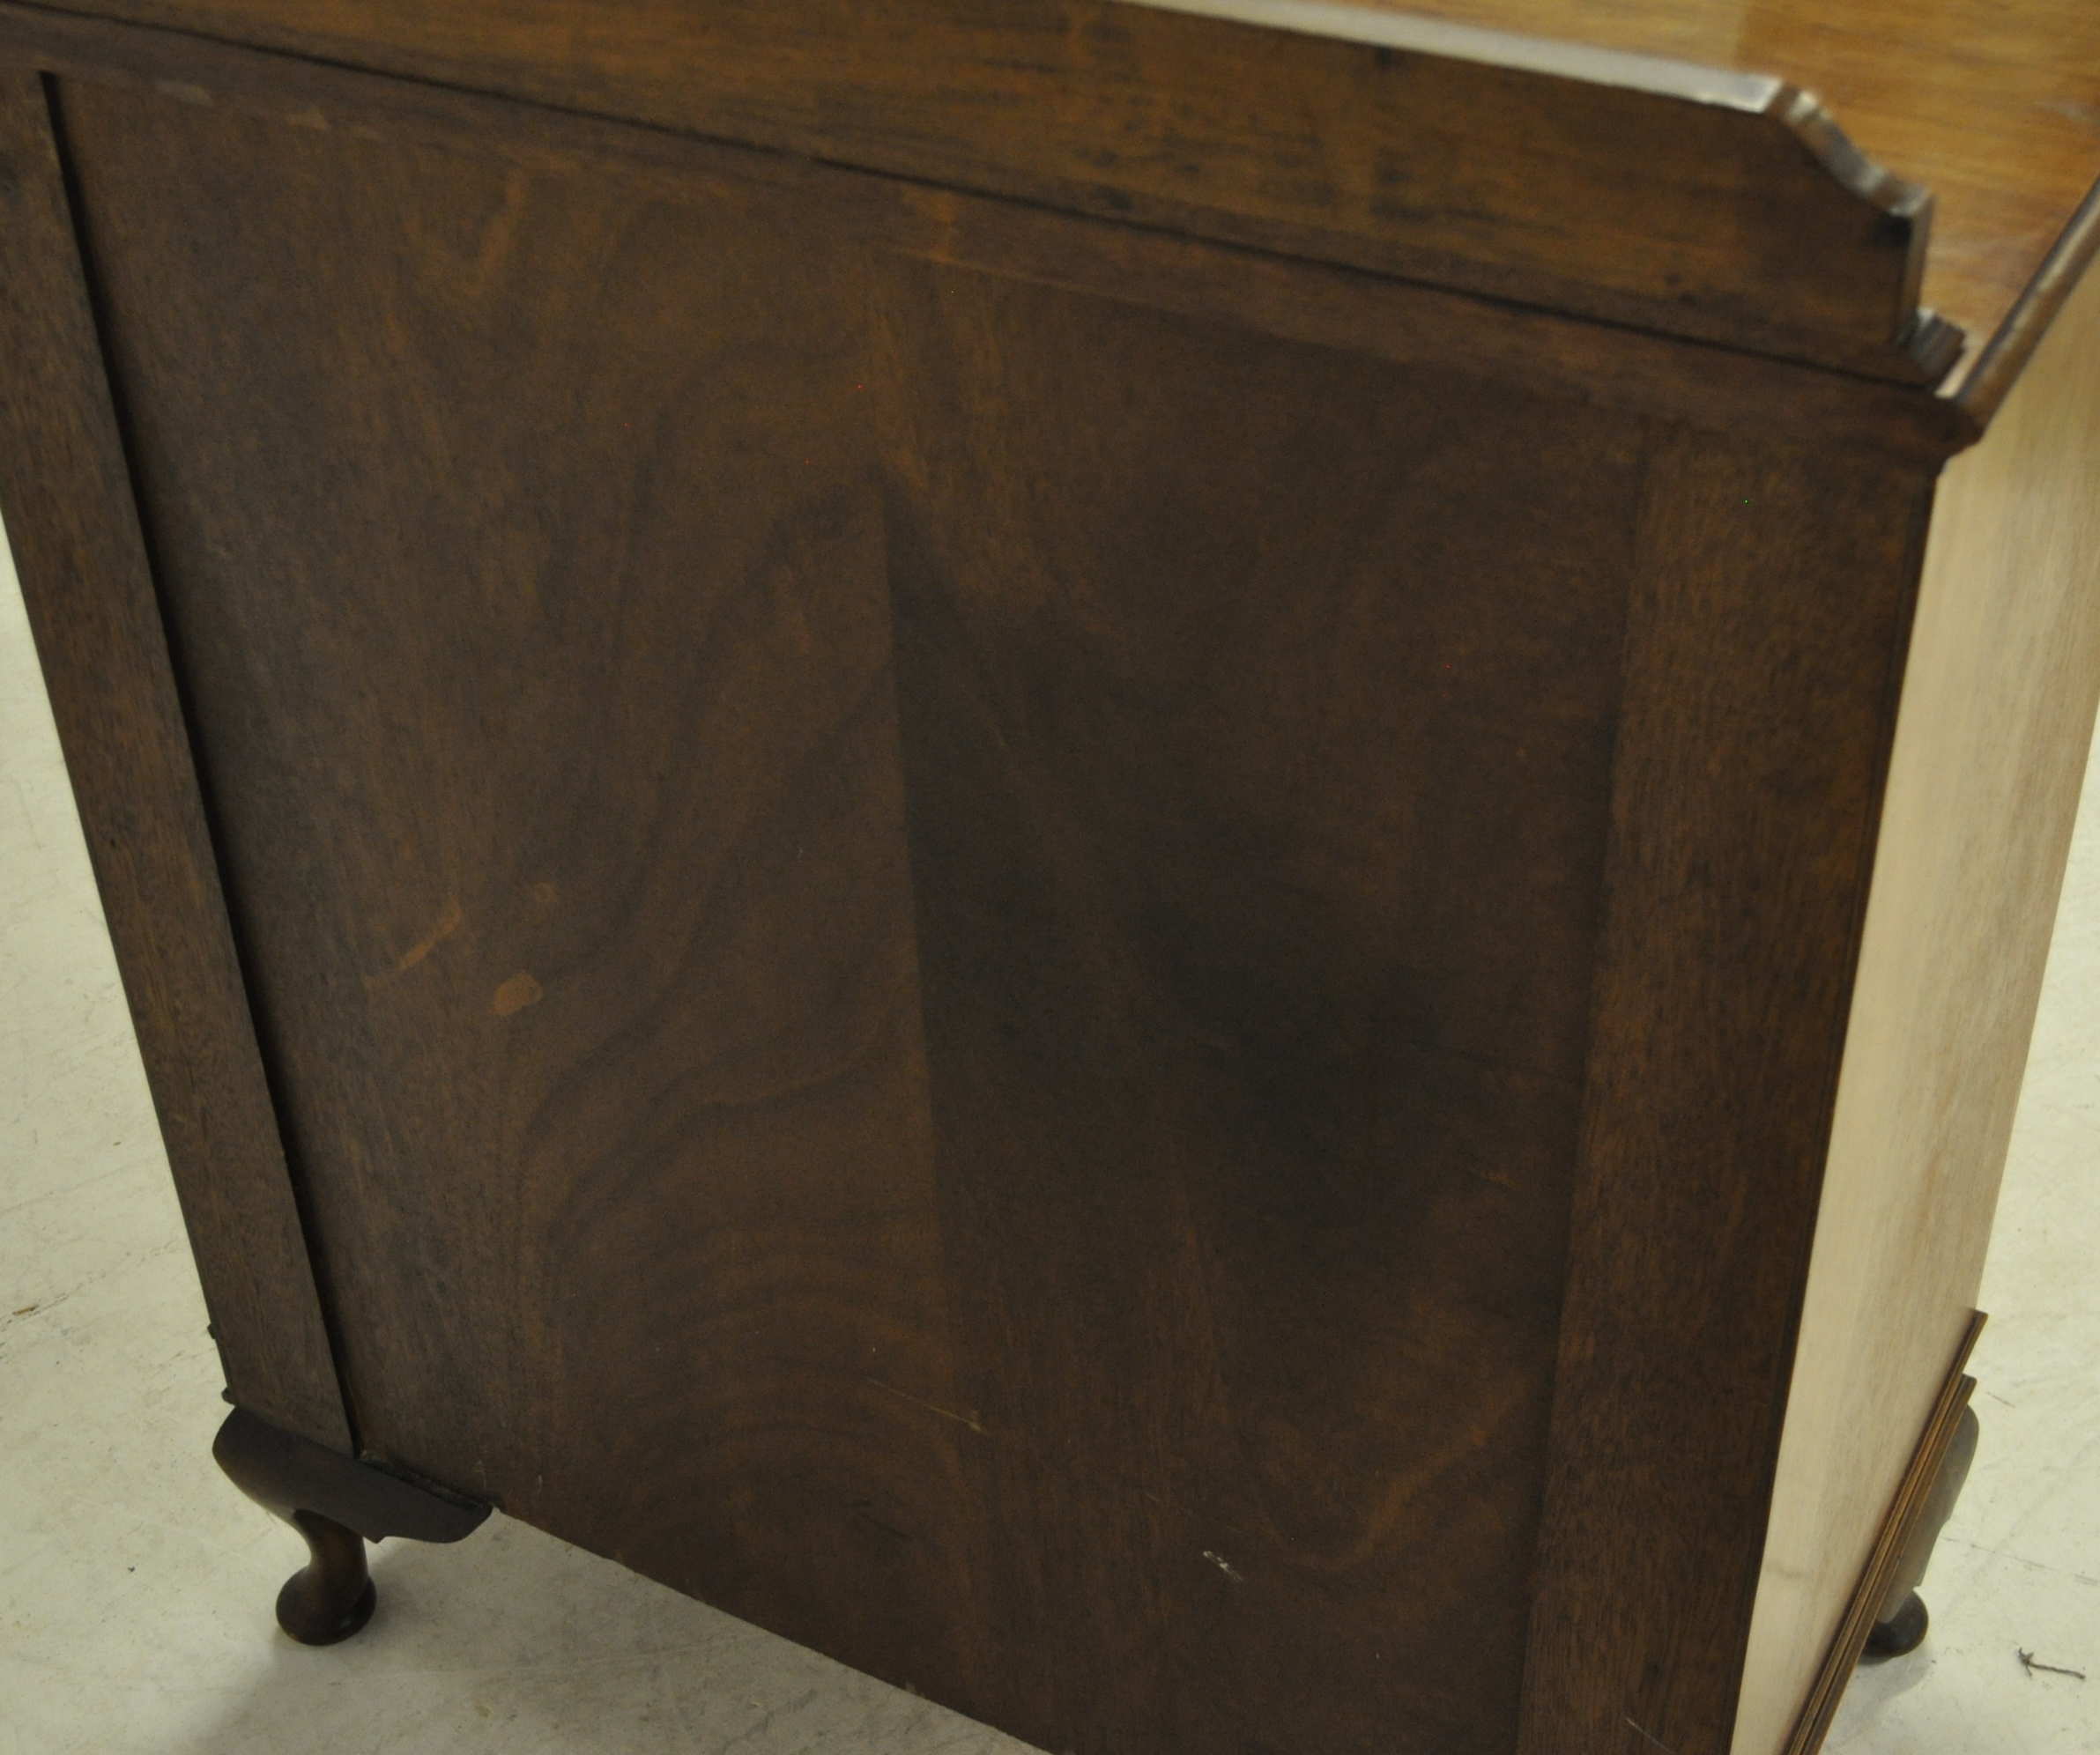 ART DECO 1930S WALNUT TALLBOY CHEST OF DRAWERS - Image 9 of 9